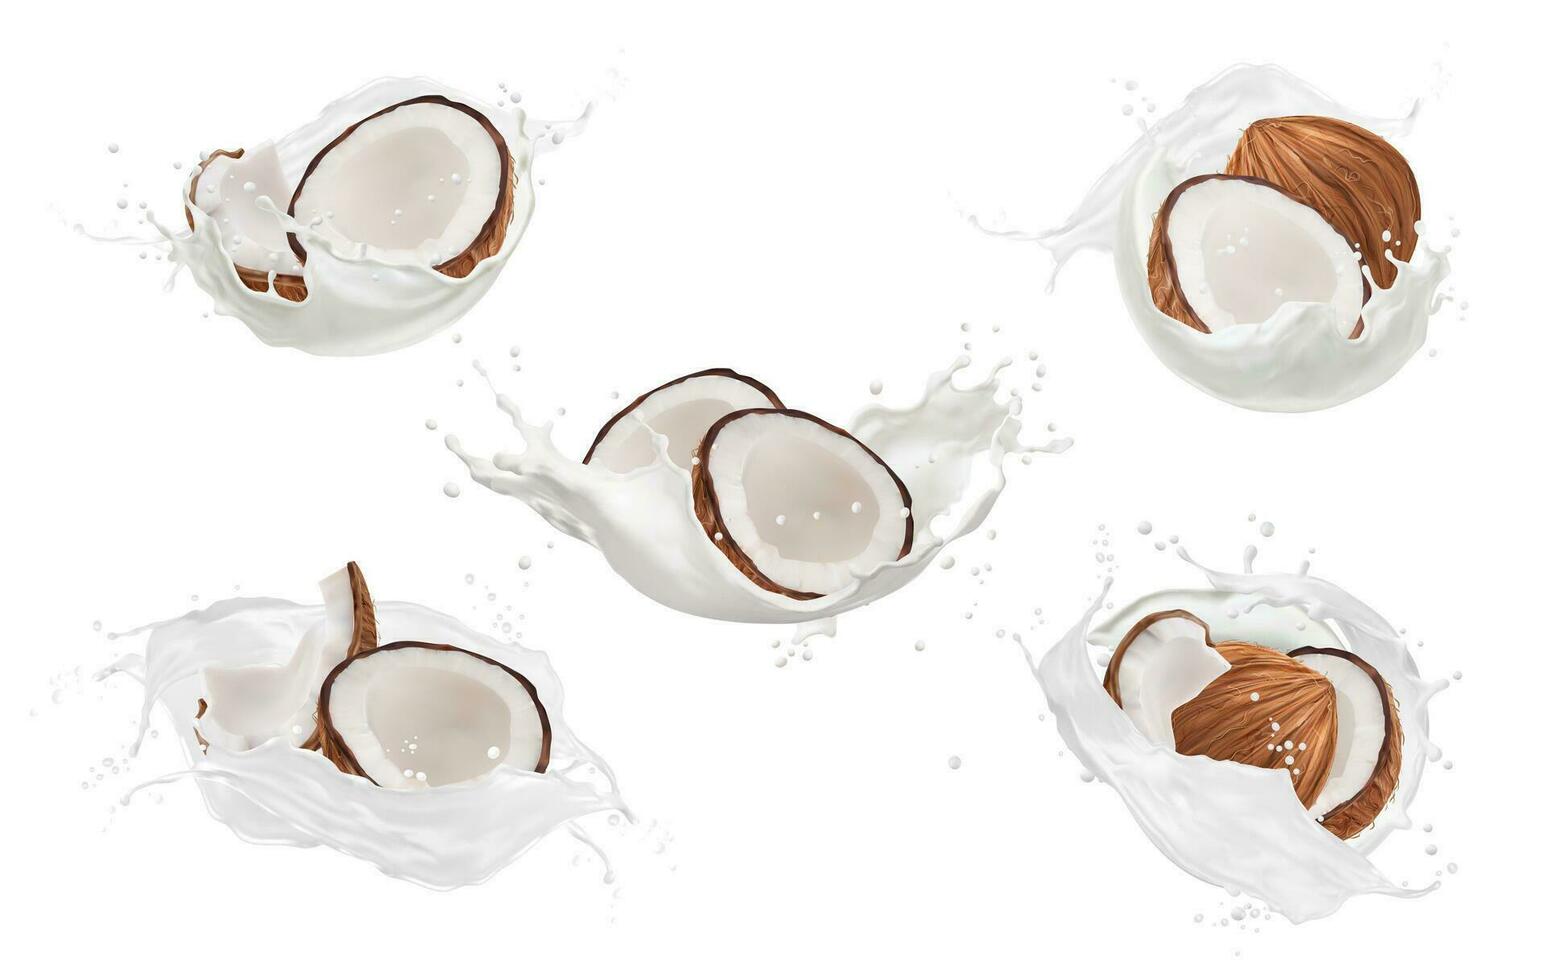 Realistic coconut milk drink splashes with drops vector